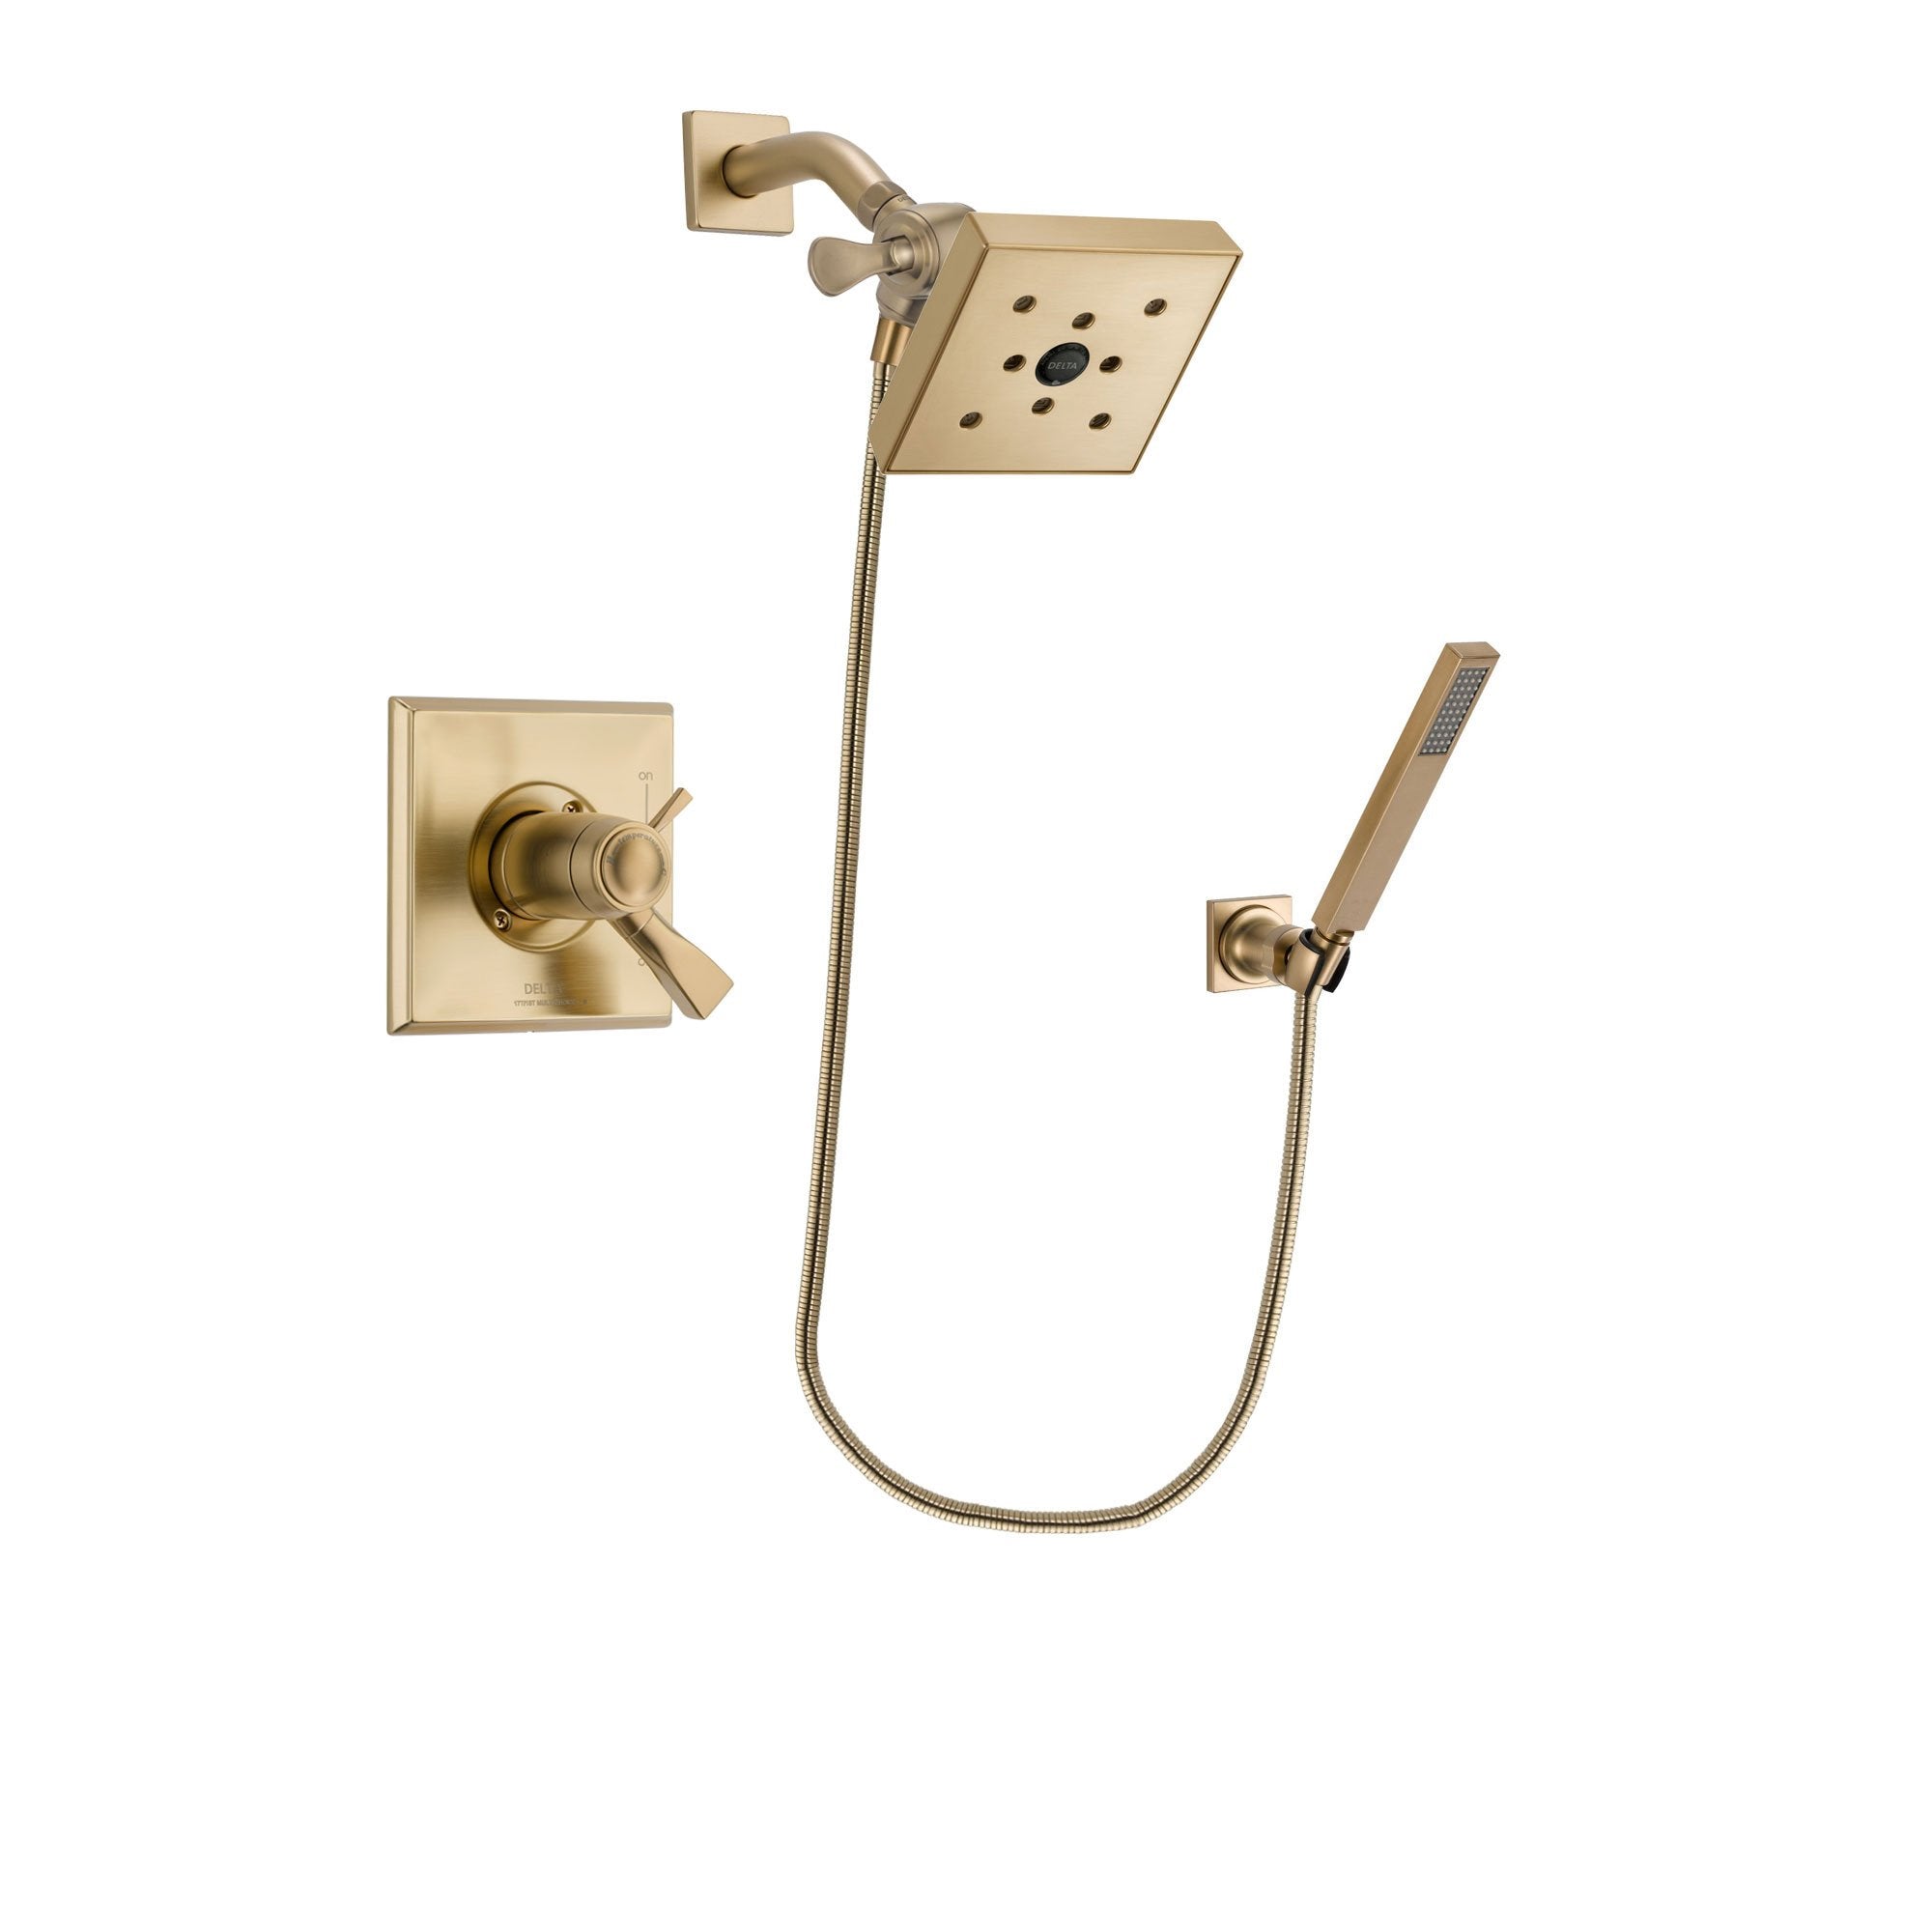 Delta Dryden Champagne Bronze Finish Thermostatic Shower Faucet System Package with Square Shower Head and Modern Wall-Mount Handheld Shower Stick Includes Rough-in Valve DSP3898V